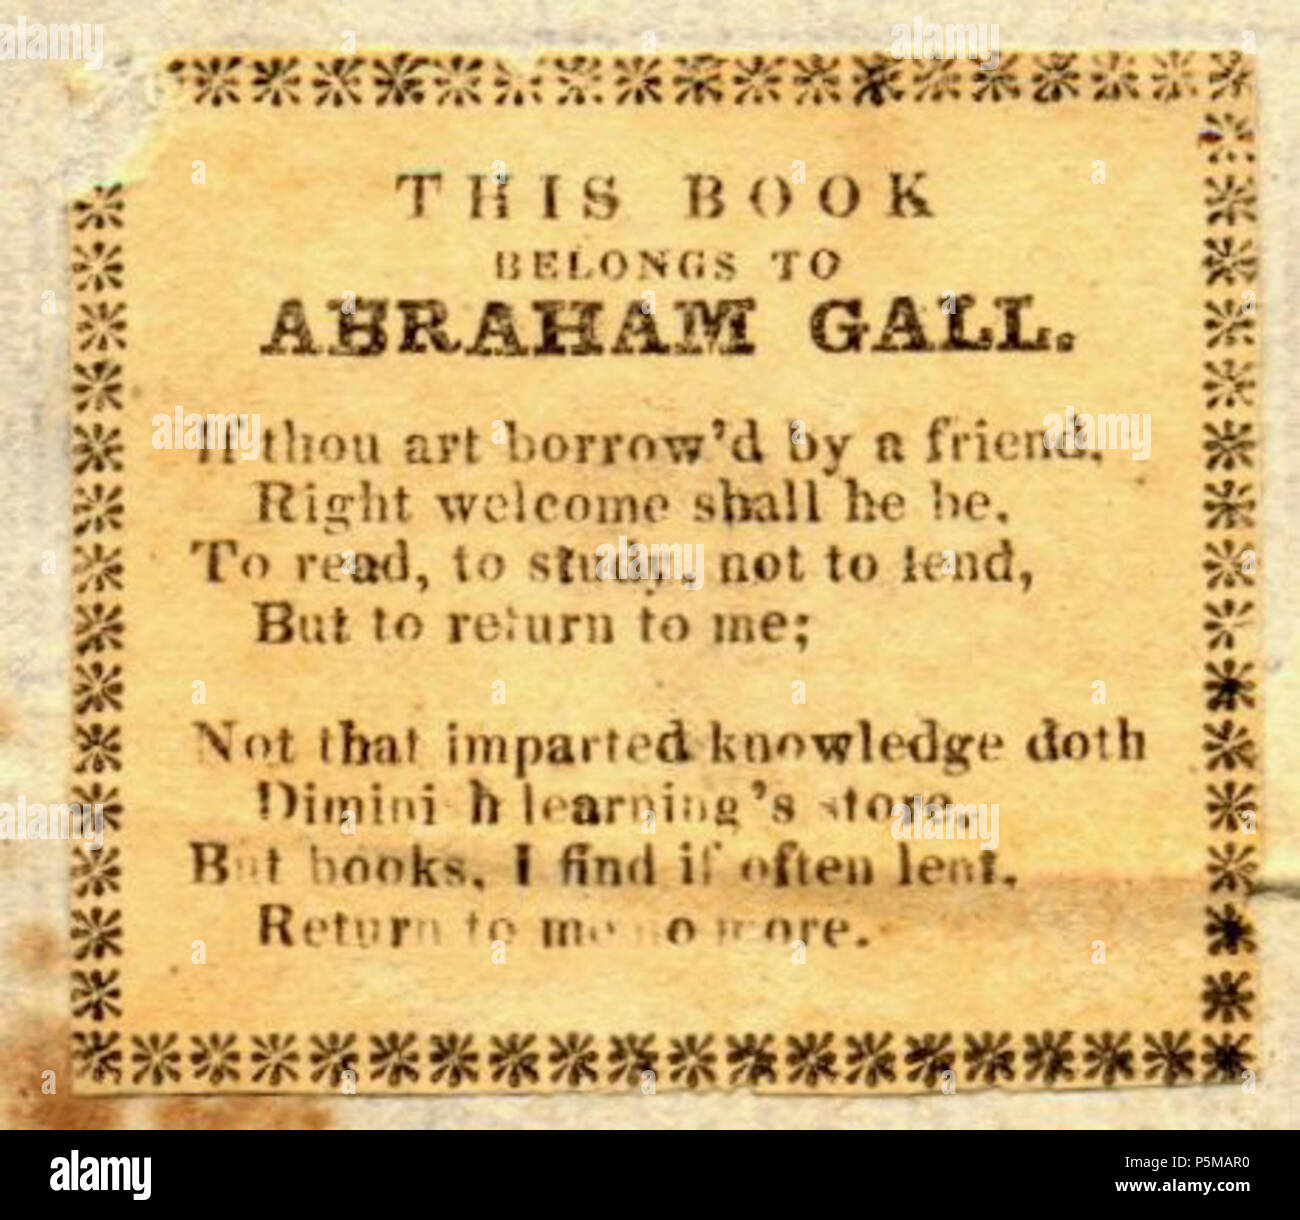 N/A. English: an ex libris 'poem' from 1741  “ If thou art borrow'd by a friend, Right welcome shall he be, To read, to study, not to lend, But to return to me; Not that imparted knowledge doth Diminish learning's store, But books, I find if often lent, Return to me no more. ”    : ' '          . 1741. Abraham Gall 96 An ex libris poem(1741) Stock Photo